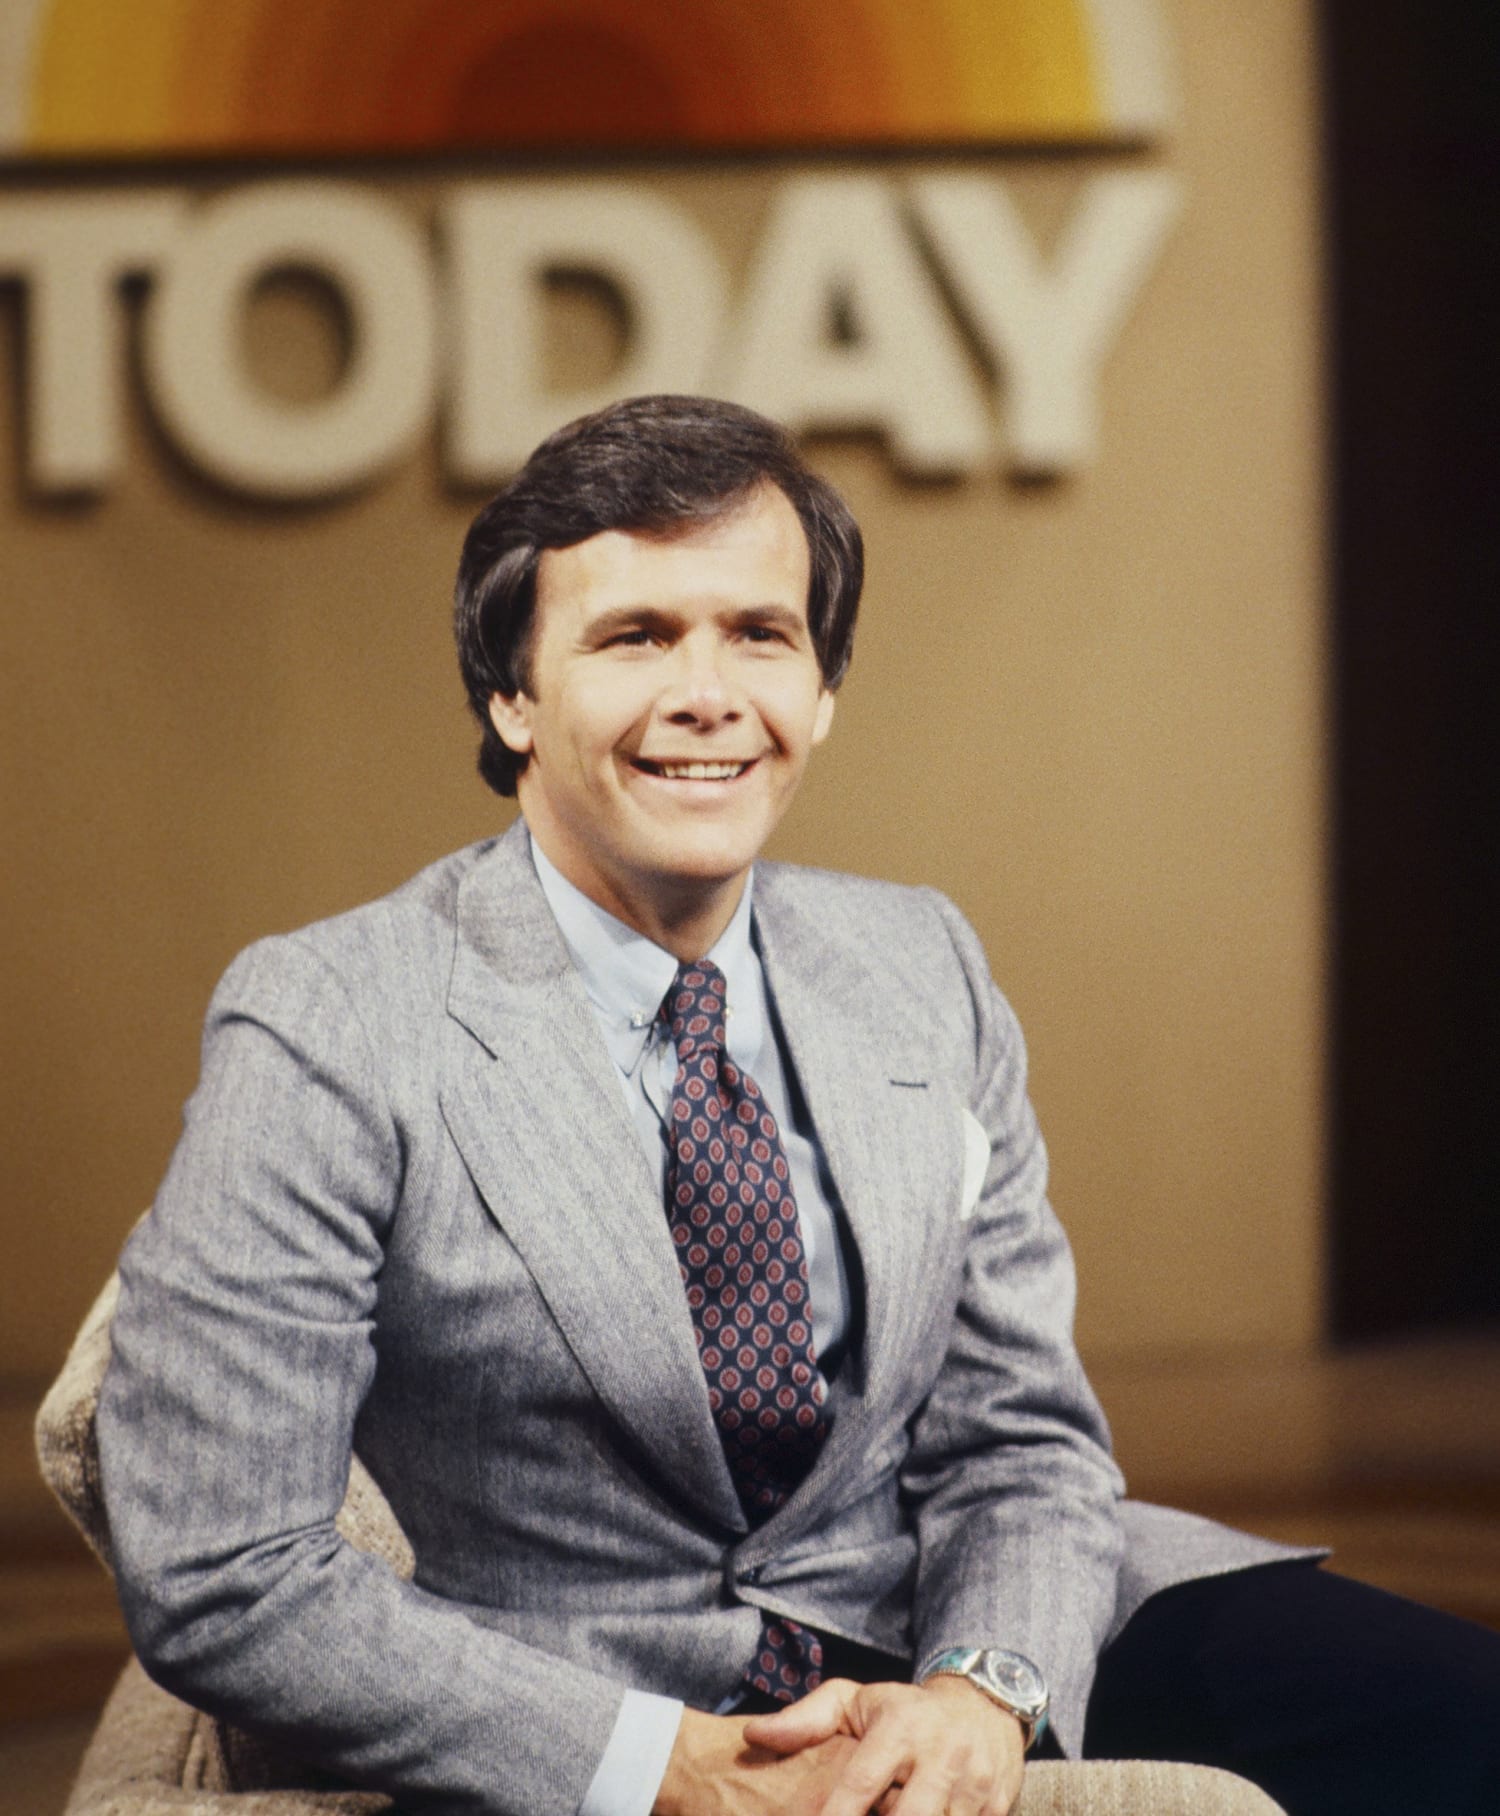 Tom Brokaw announces retirement after 55 years at NBC News